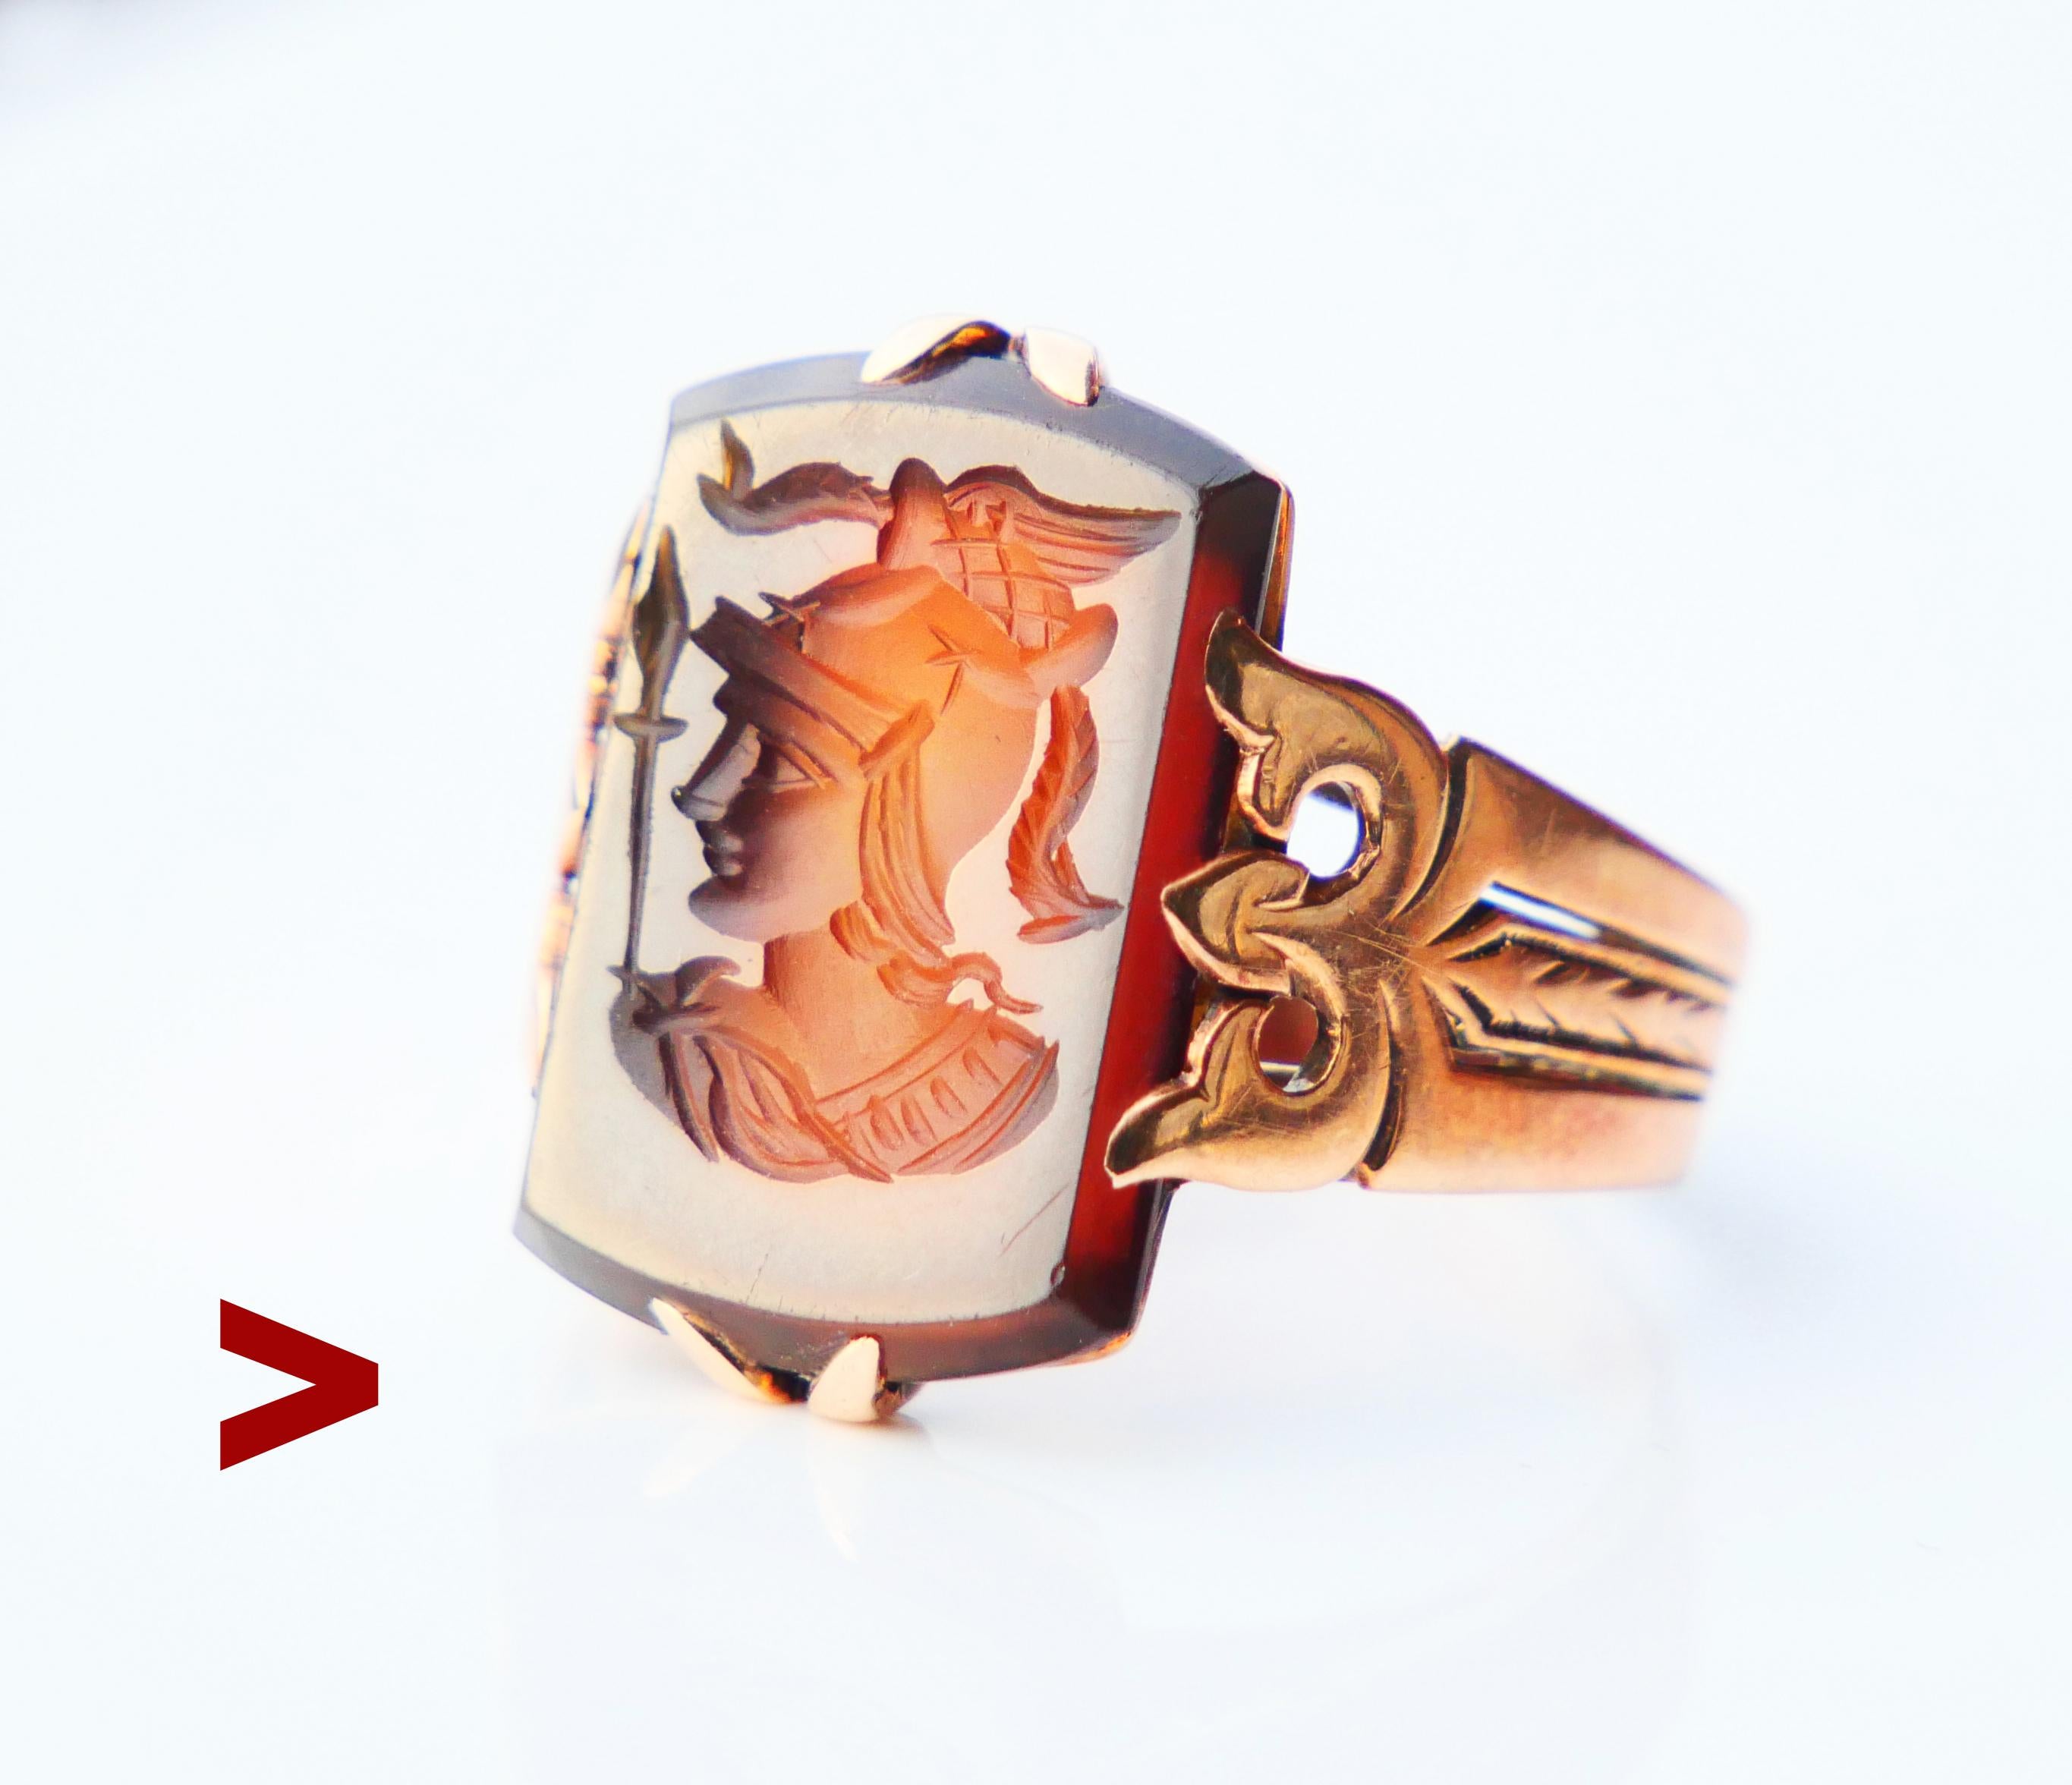 Antique Russian Unisex Signet Intaglio Ring dating to ca. ca. late XIX - early XX cent. in solid 14K Rose / Red Gold with claw set fine intaglio on Red Onyx depicting Greek Athena (Roman Minerva ) or Anat (Canaanite ) or Neith (Egyptian) - Goddess